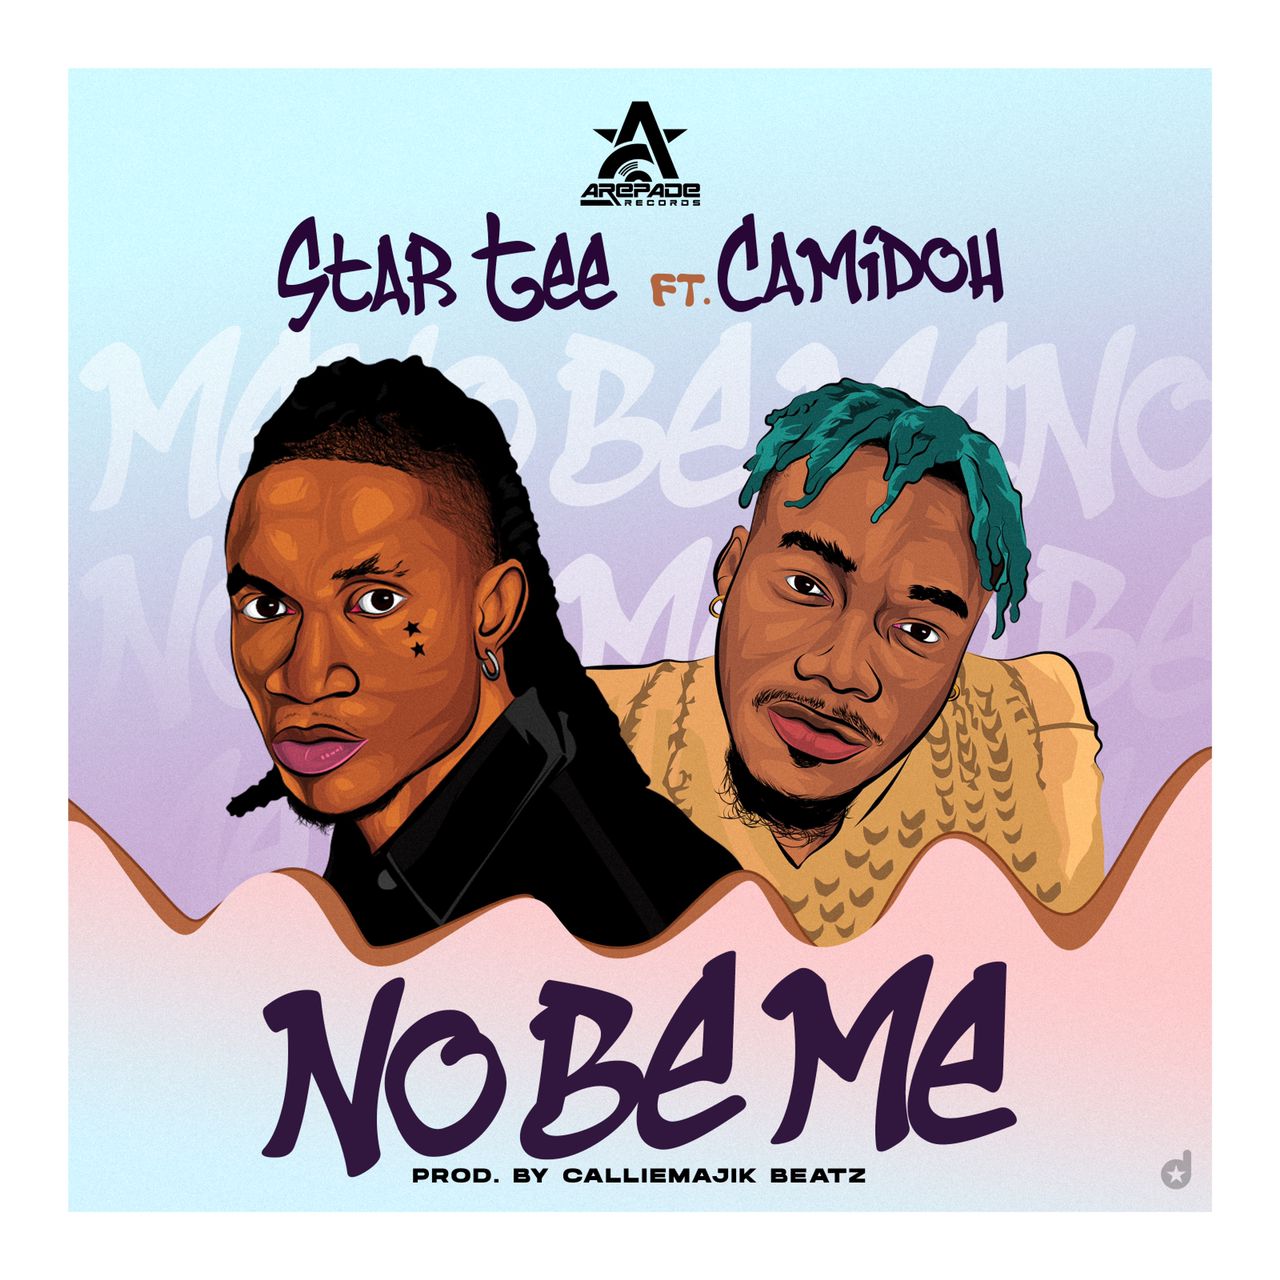 Star Tee features Camidoh on “No Be Me”